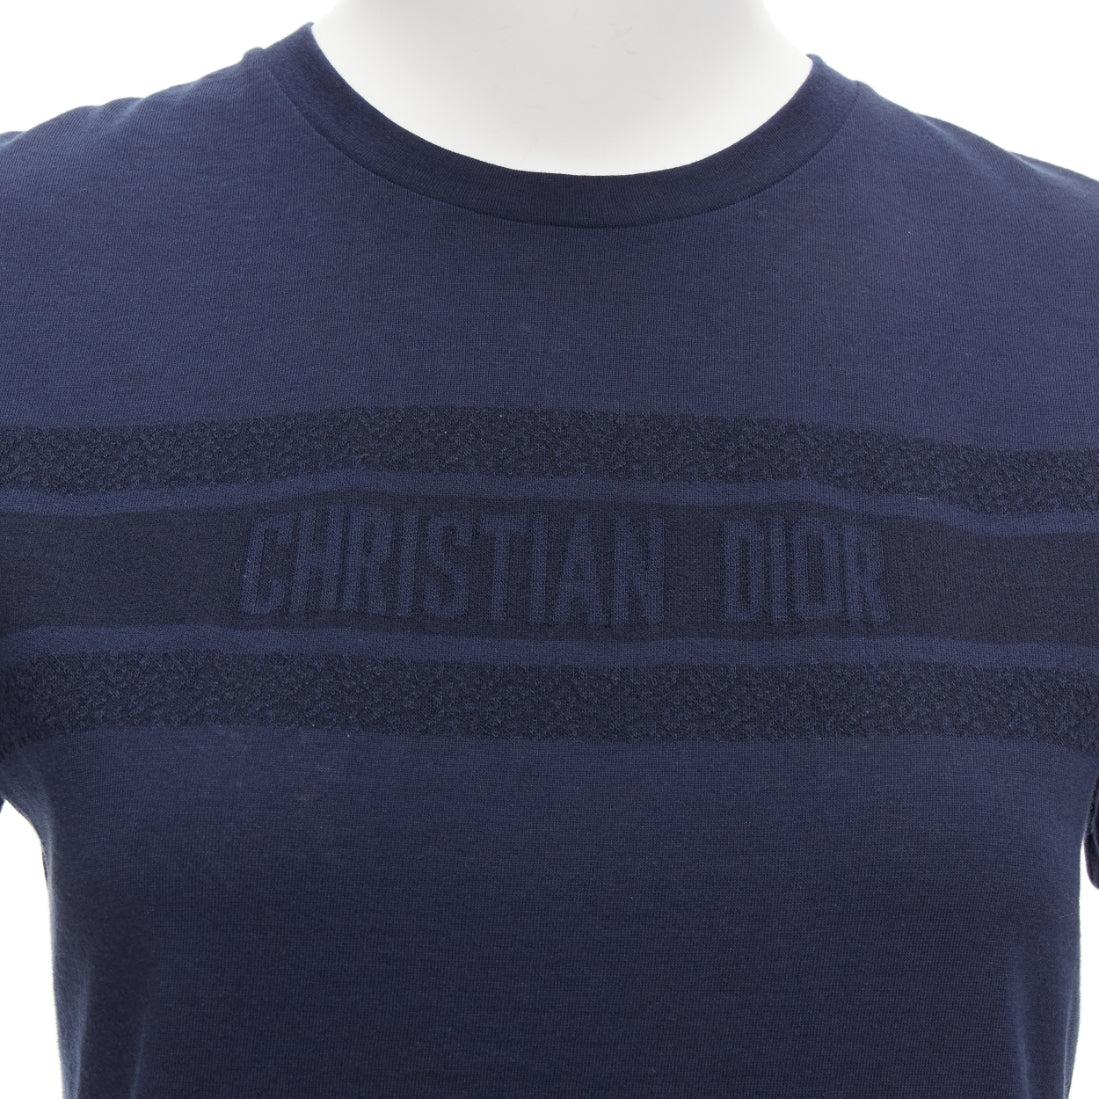 CHRISTIAN DIOR navy textured logo stripe front crew neck short sleeve tshirt XS
Reference: AAWC/A01118
Brand: Dior
Material: Cotton
Color: Navy
Pattern: Solid
Closure: Pullover
Made in: Italy

CONDITION:
Condition: Excellent, this item was pre-owned